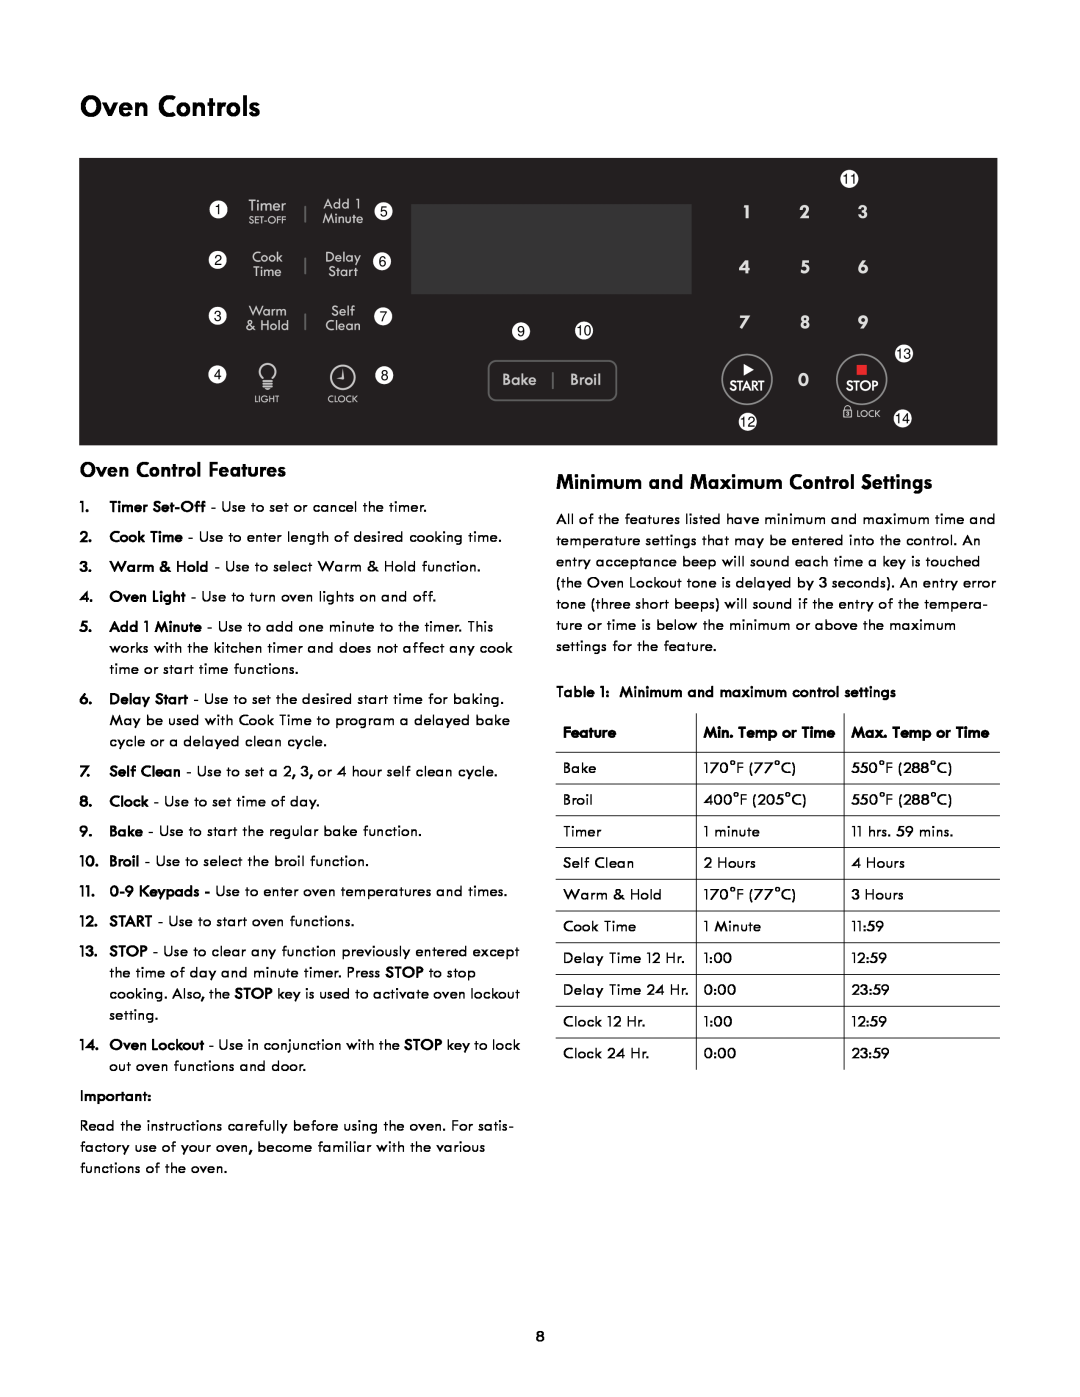 Kenmore 790-4942, 790-4940 manual Oven Controls, Oven Control Features, Minimum and Maximum Control Settings 